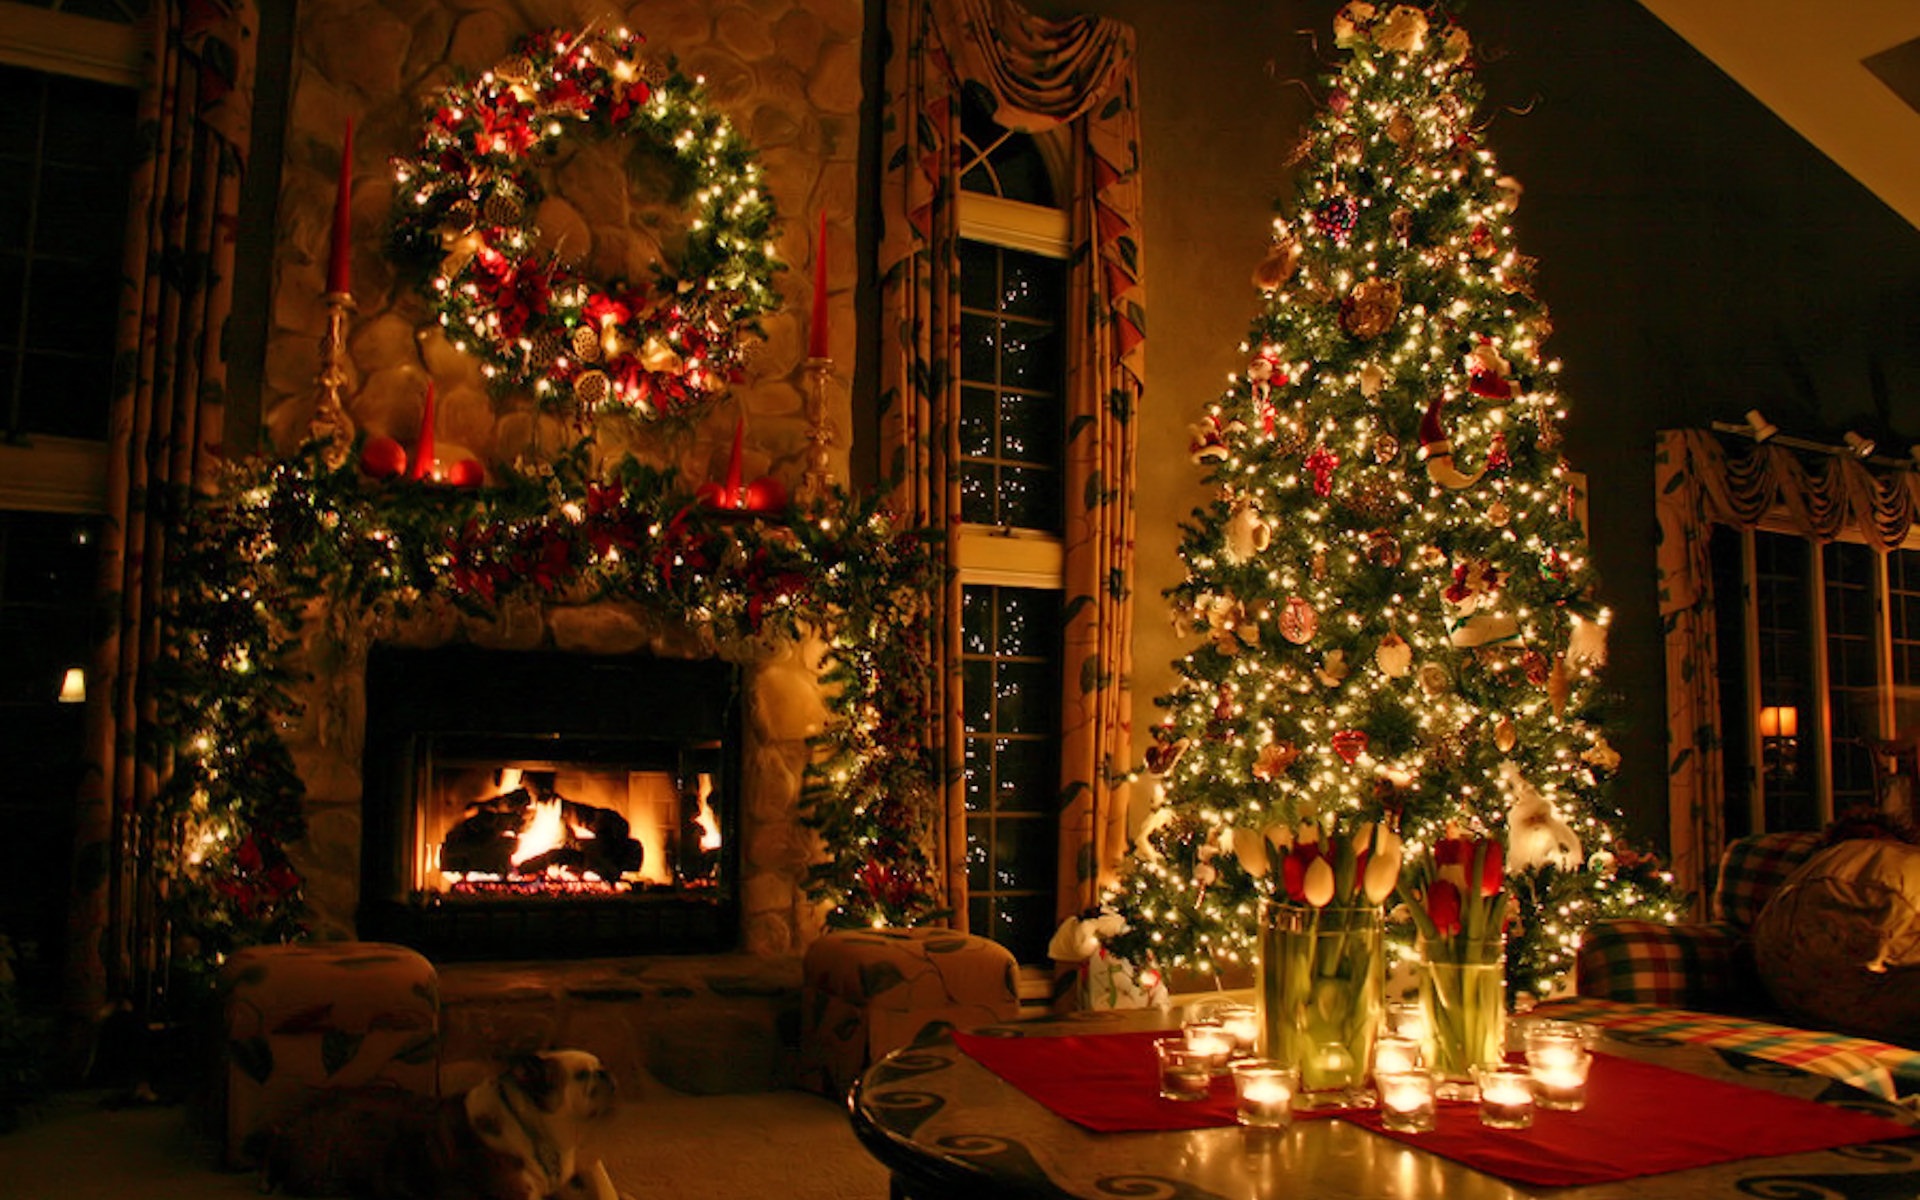 Christmas Desktop Backgrounds - Wallpapers, Pics, Pictures, Images |